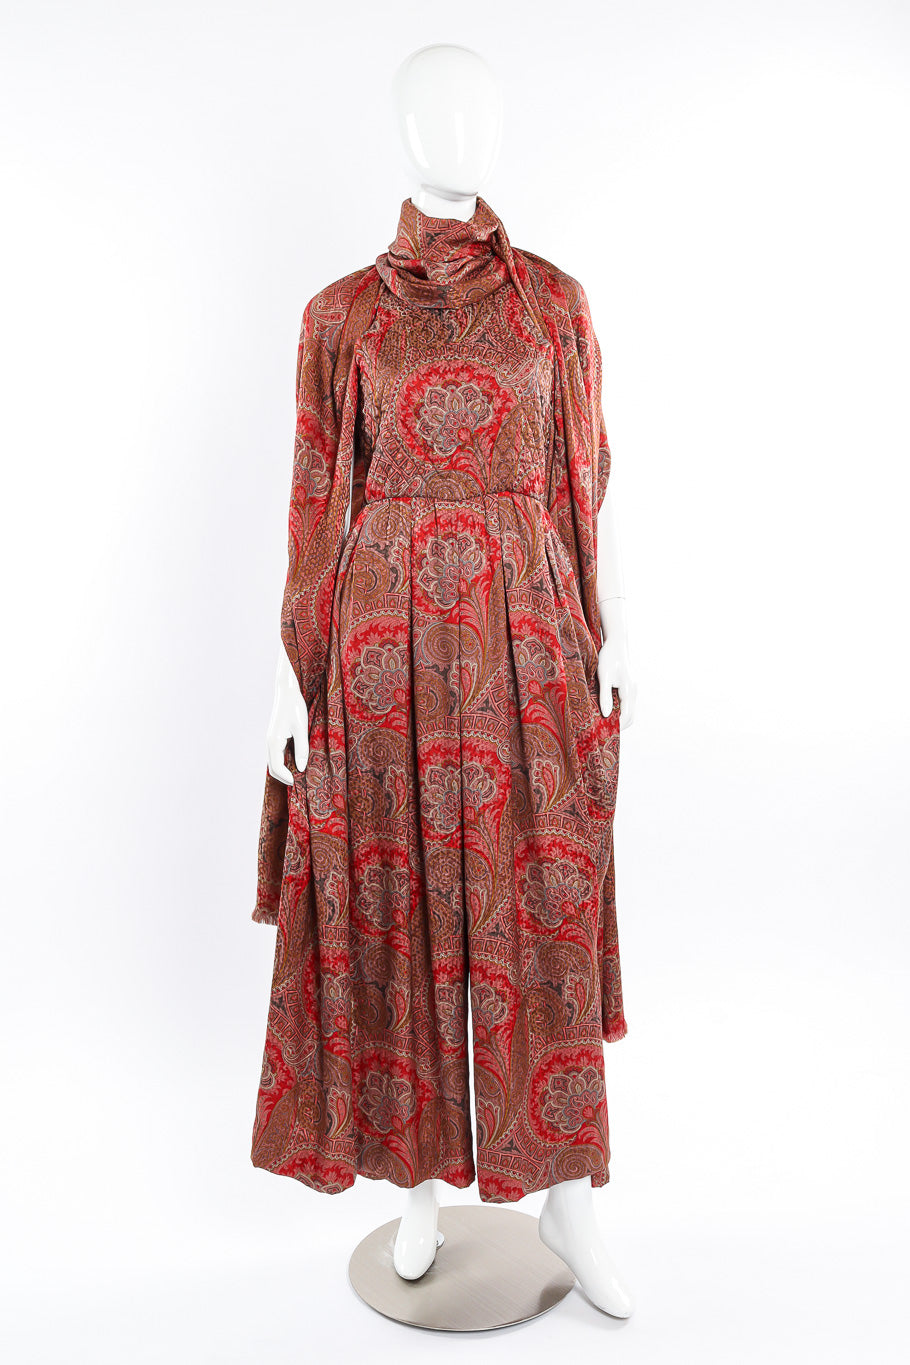 Jumpsuit with large shawl by Carolyne Roehm on mannequin shawl around neck @recessla